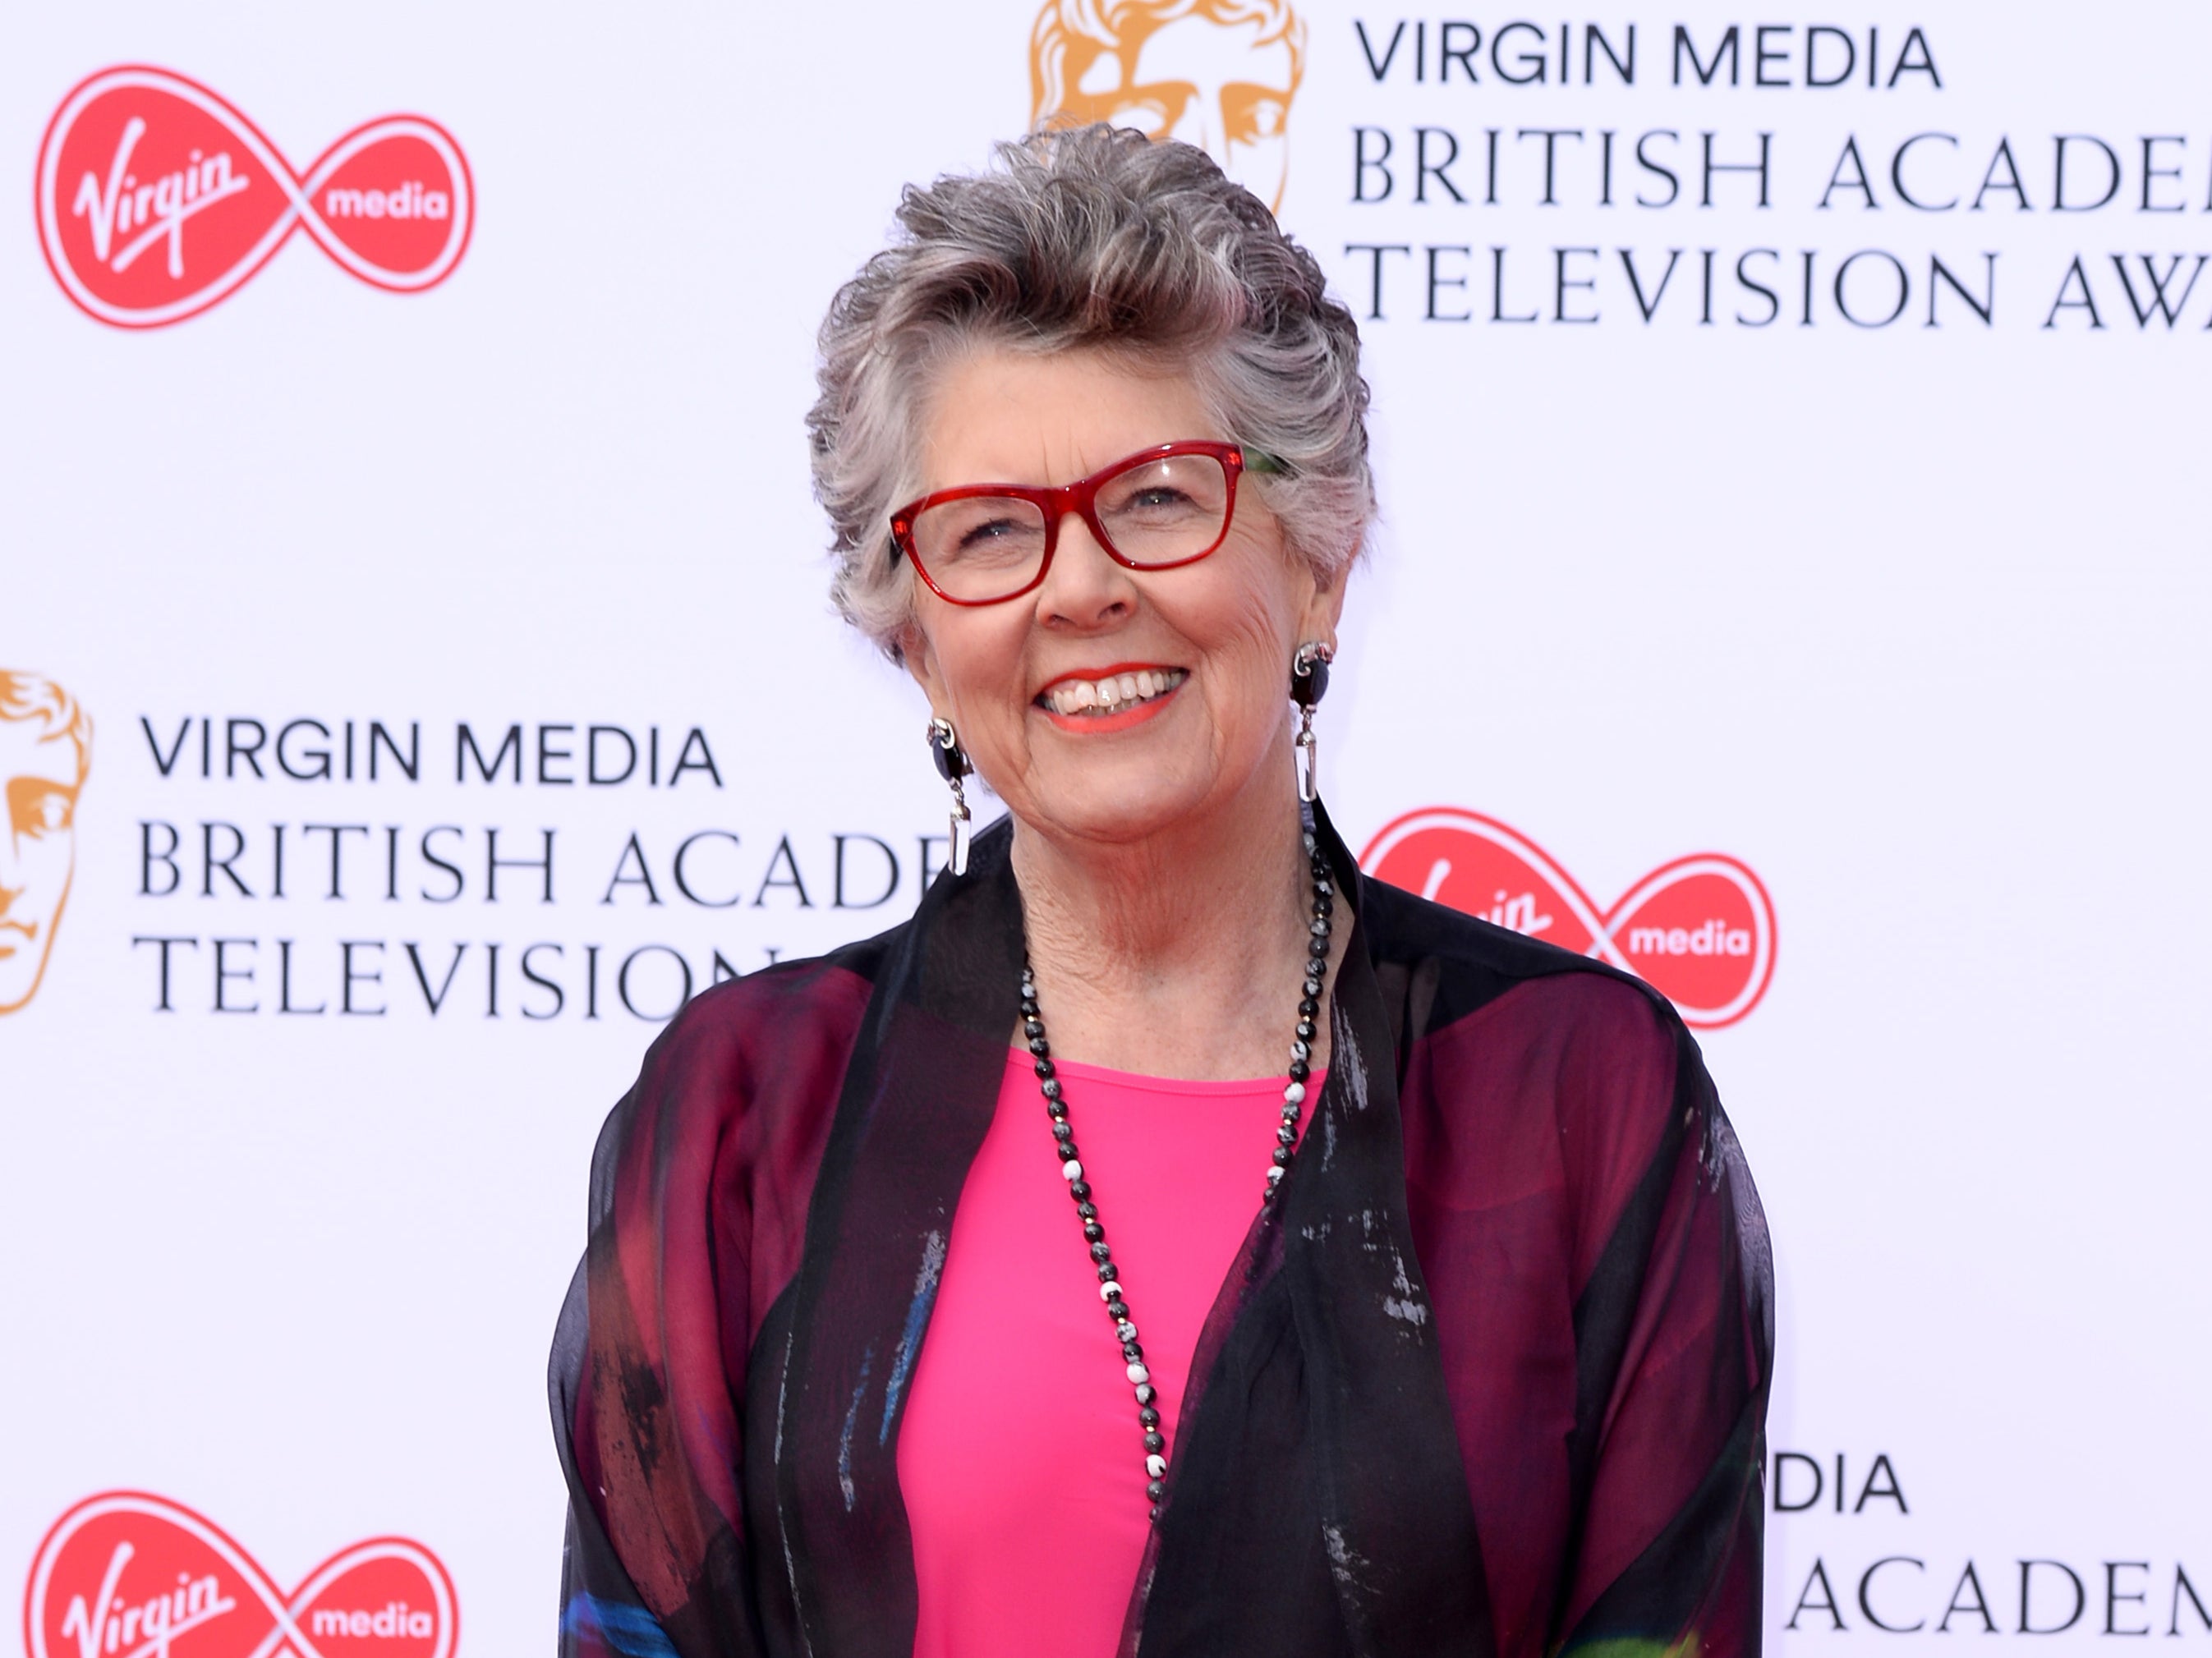 Dame Prue Leith at the Virgin Media British Academy Television Awards 2019